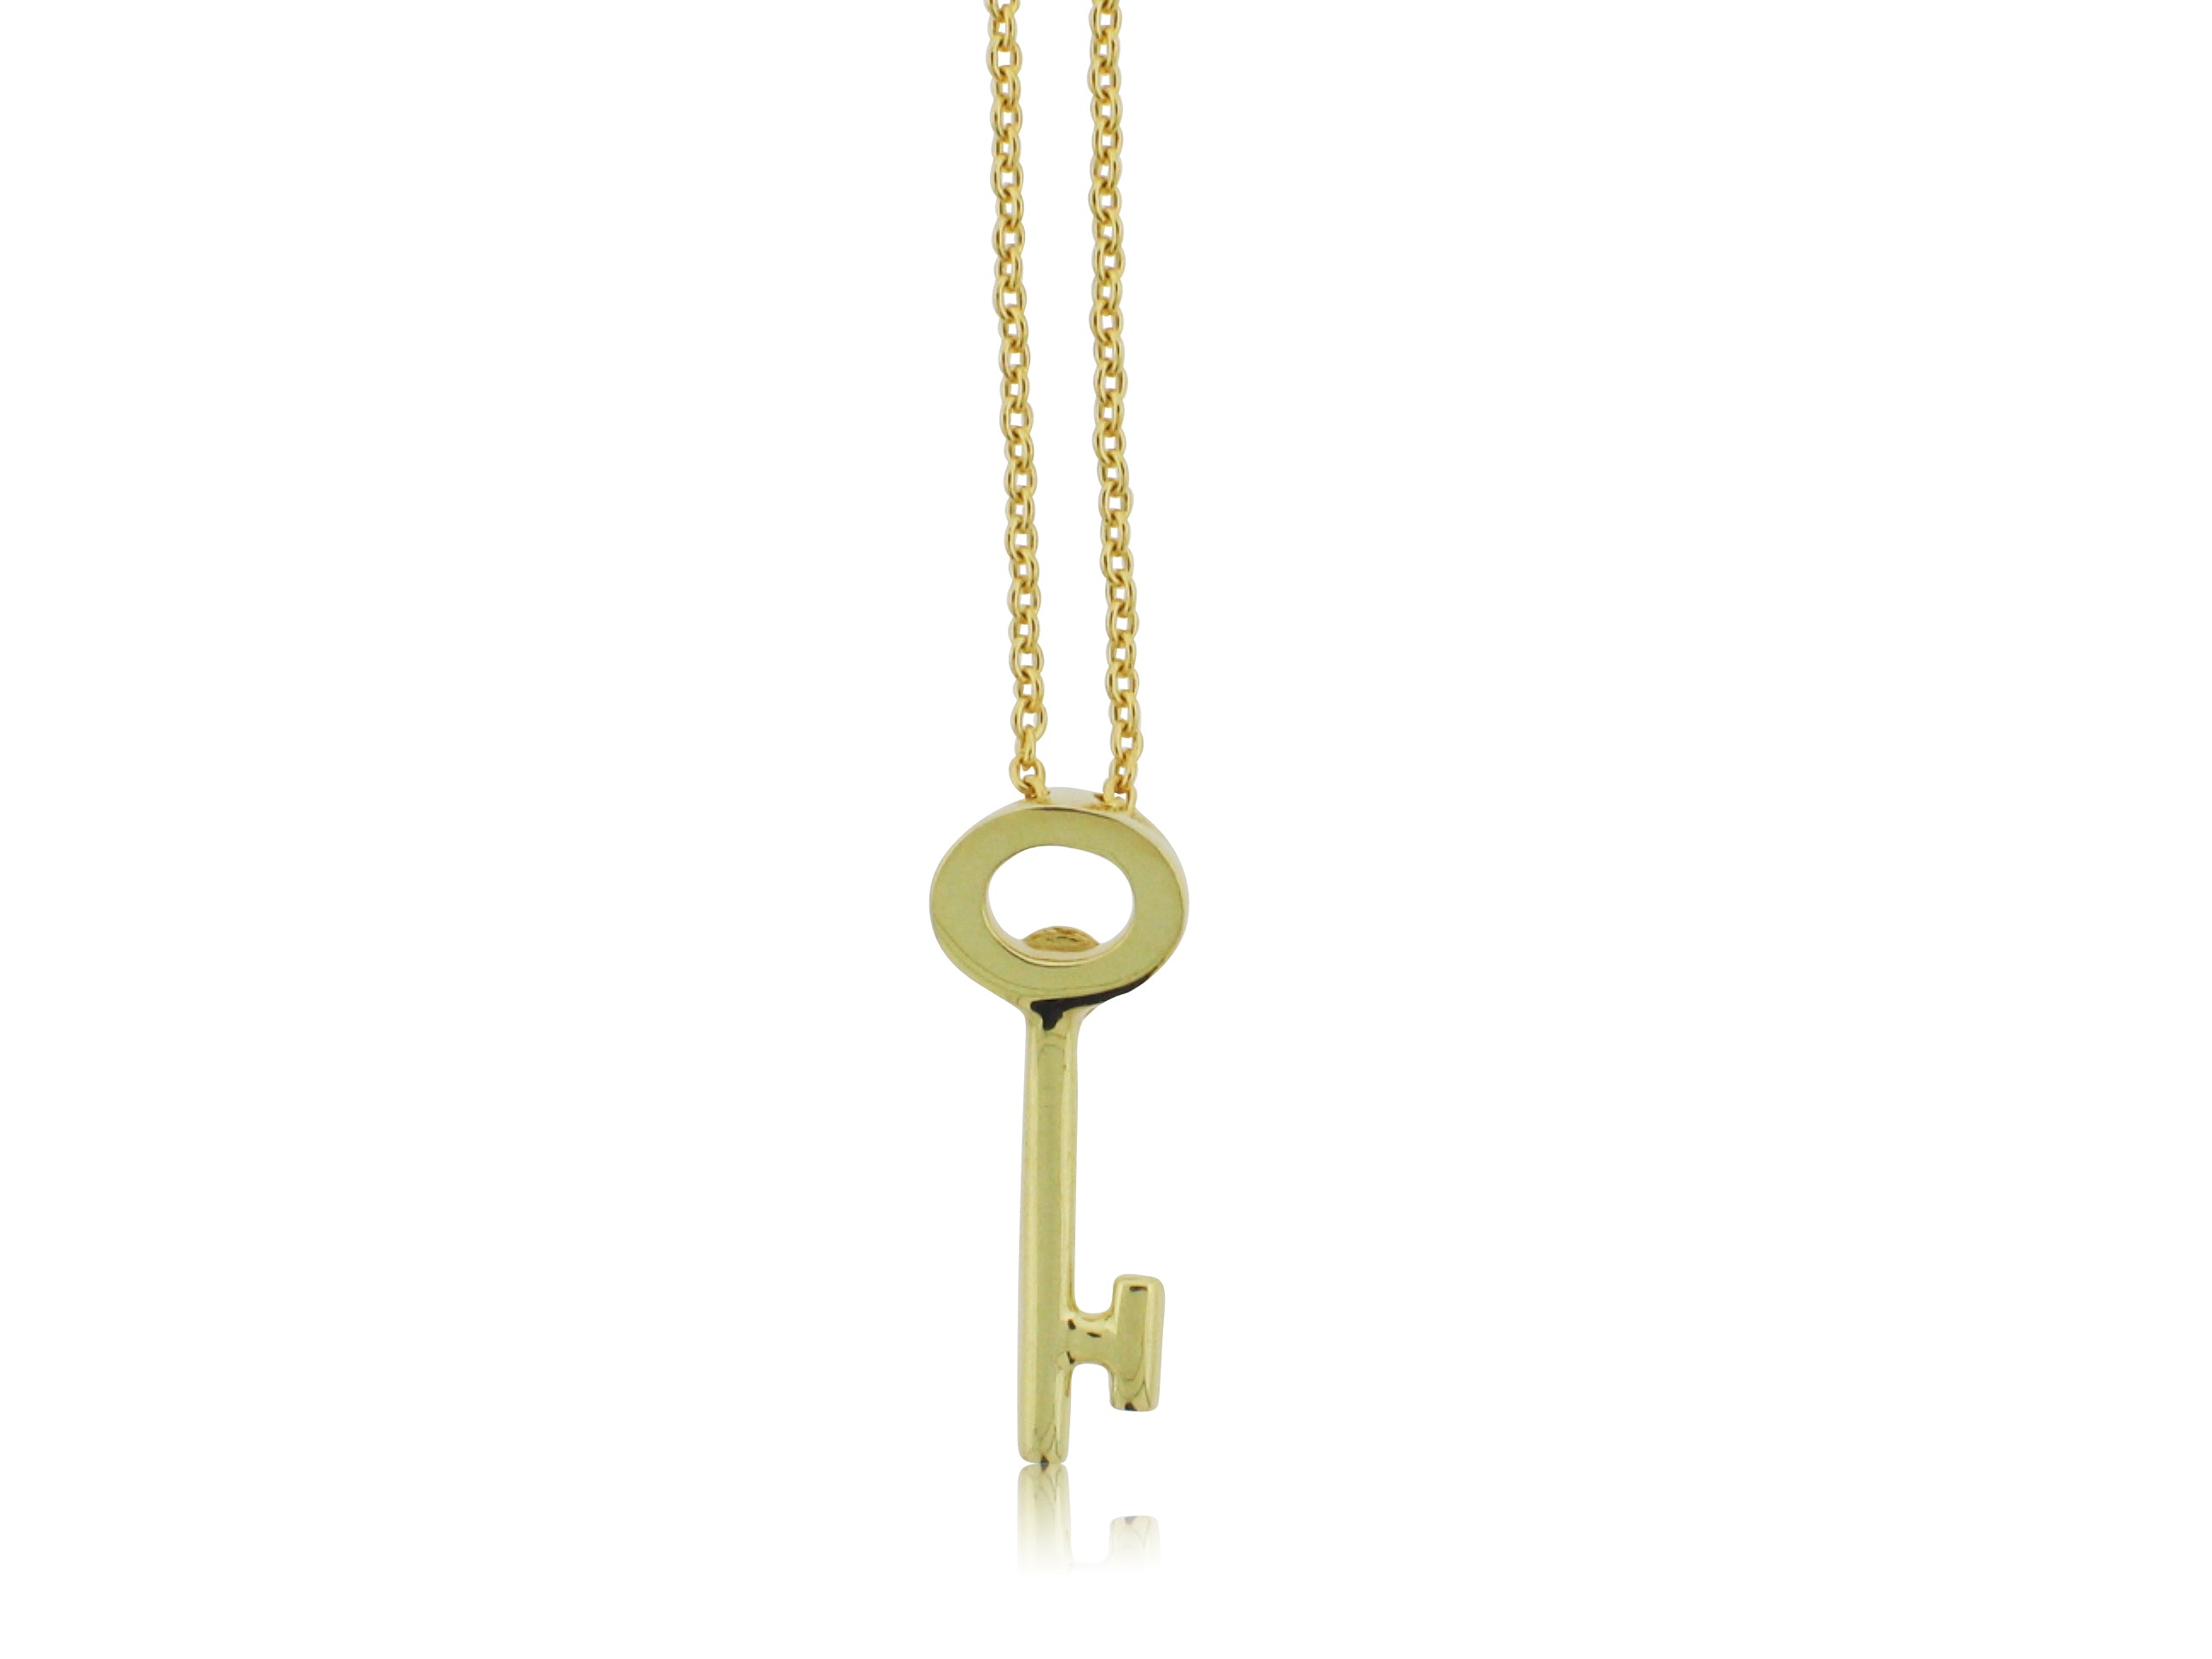 ROBERTO COIN 18K YELLOW GOLD KEY NECKLACE FROM THE GOLD COLLECTION